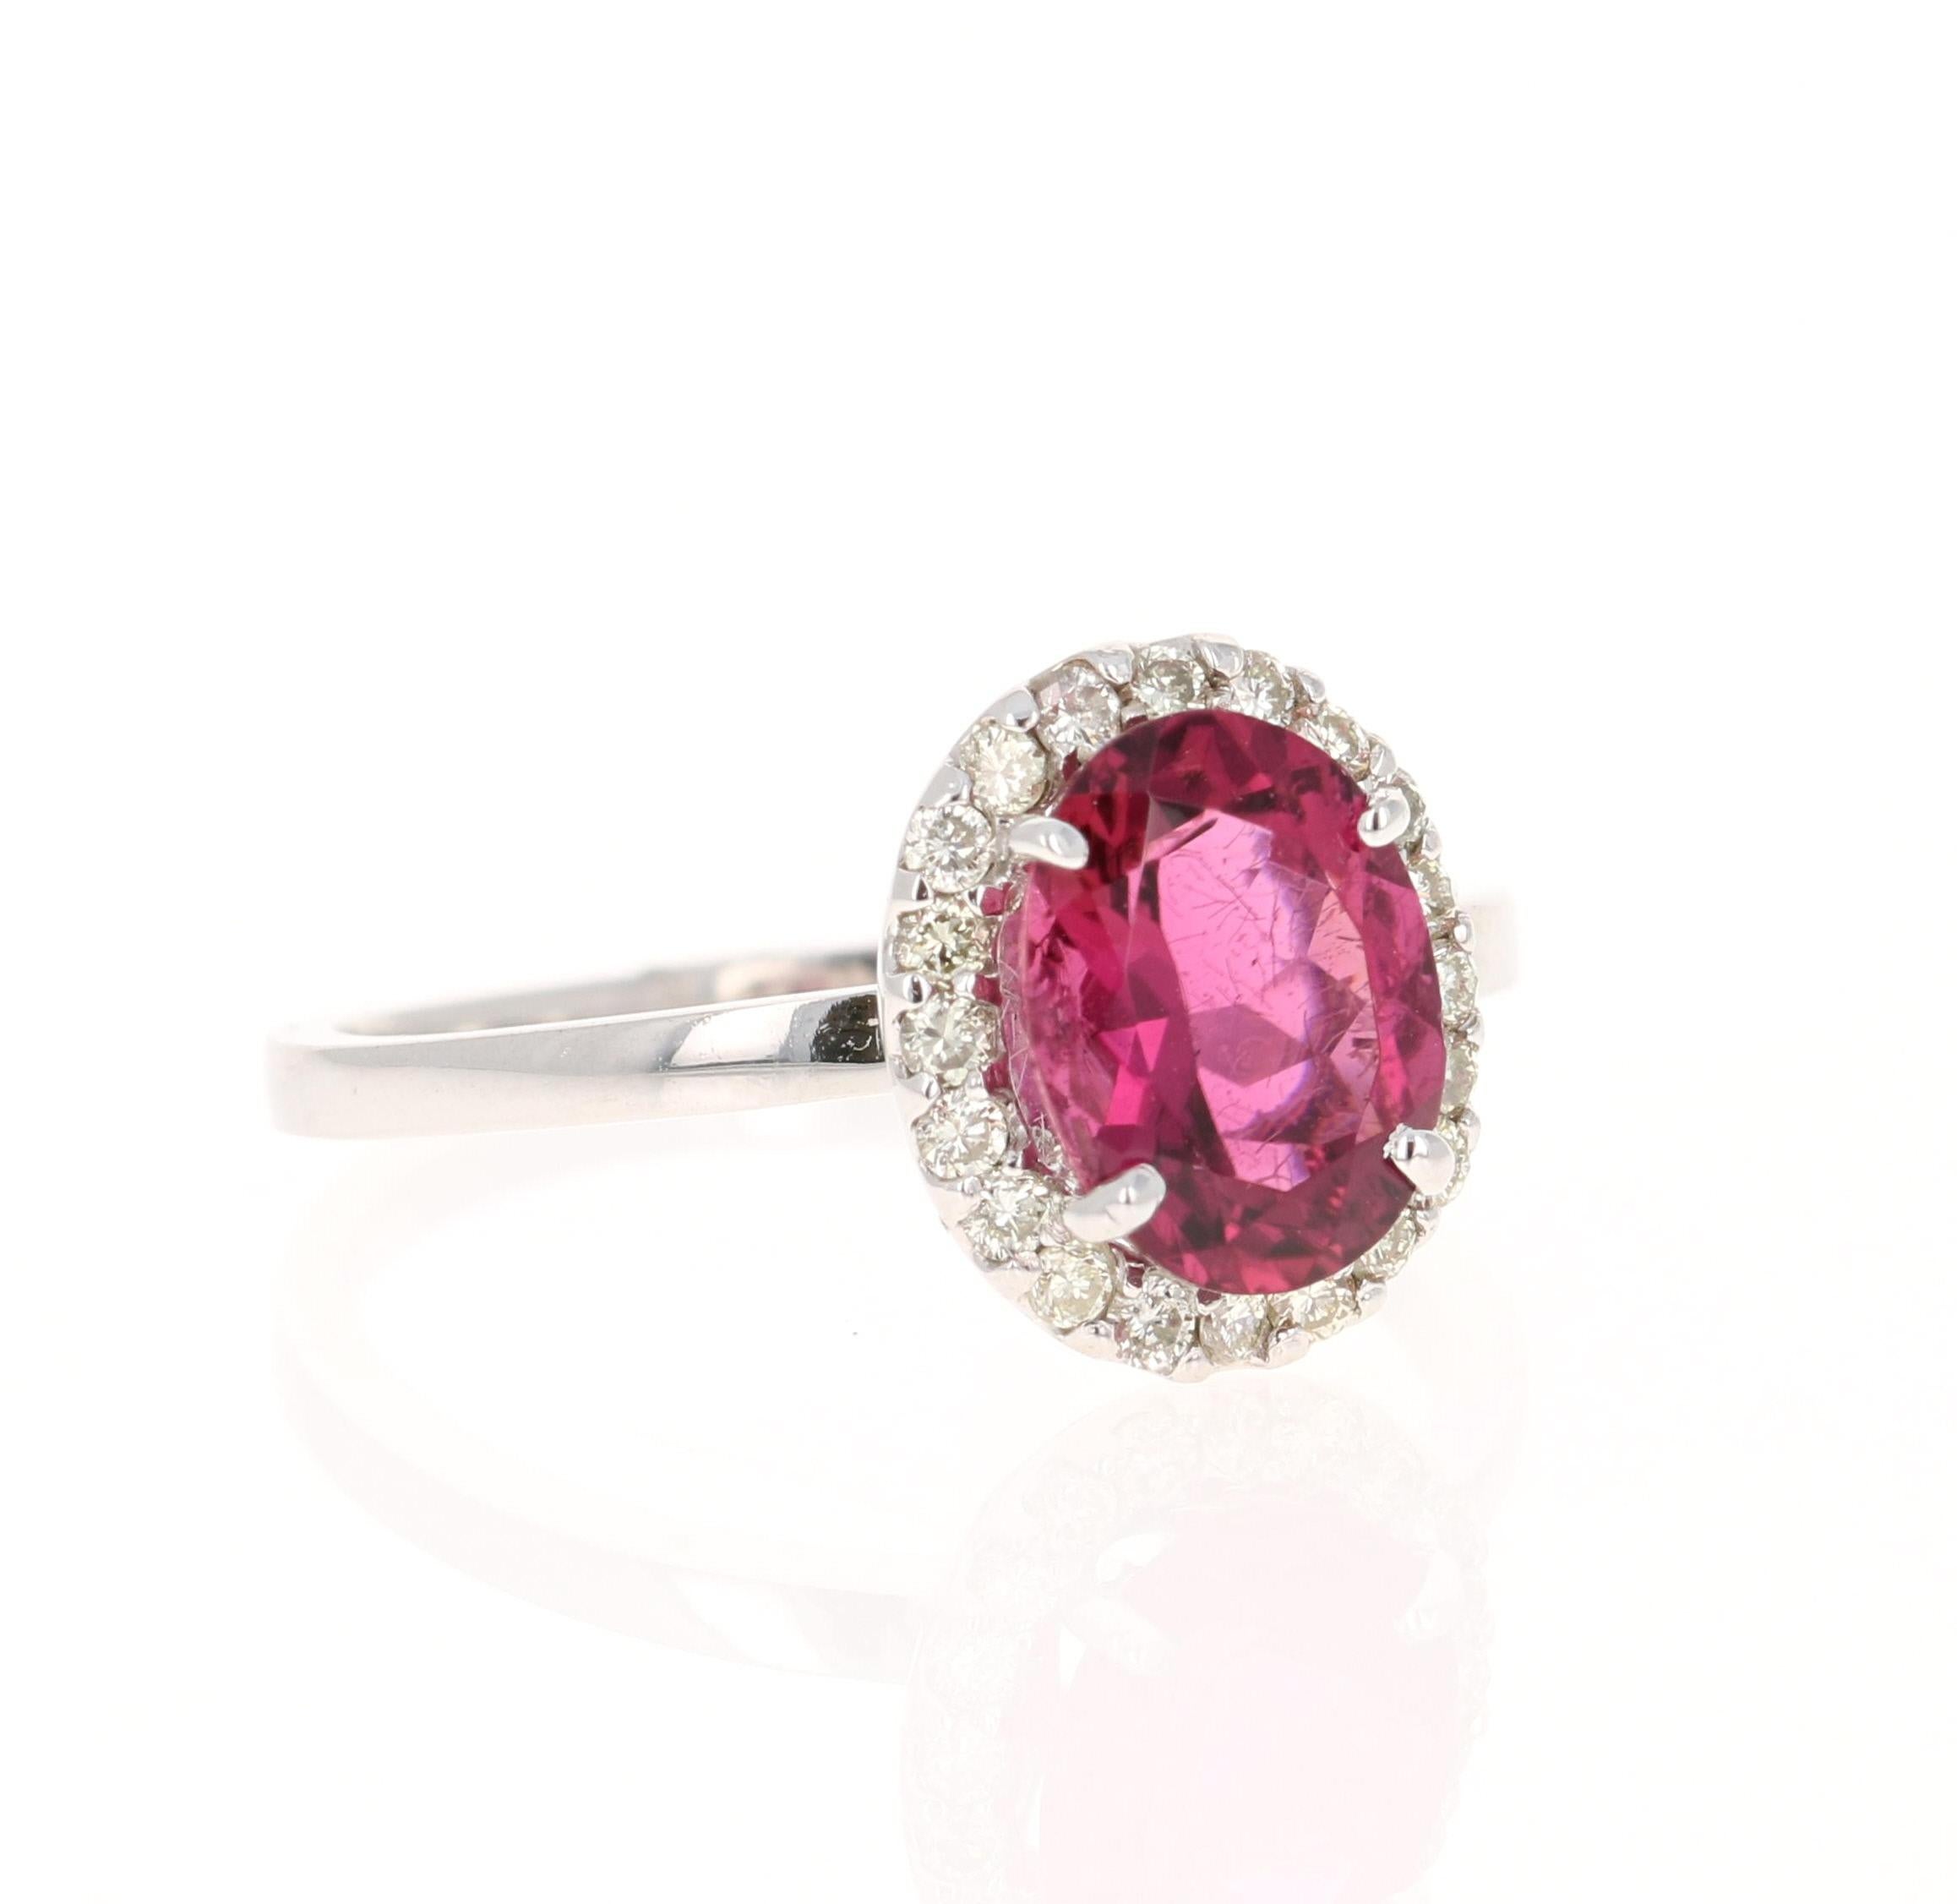 This ring has an Oval Cut Hot Pink Tourmaline that weighs 1.76 Carats. Surrounding the tourmaline are 20 Round Cut Diamonds weighing 0.25 Carats. 
The total carat weight of the ring is 2.01 Carats. 

The tourmaline measures at 9 mm x 7.5 mm (length